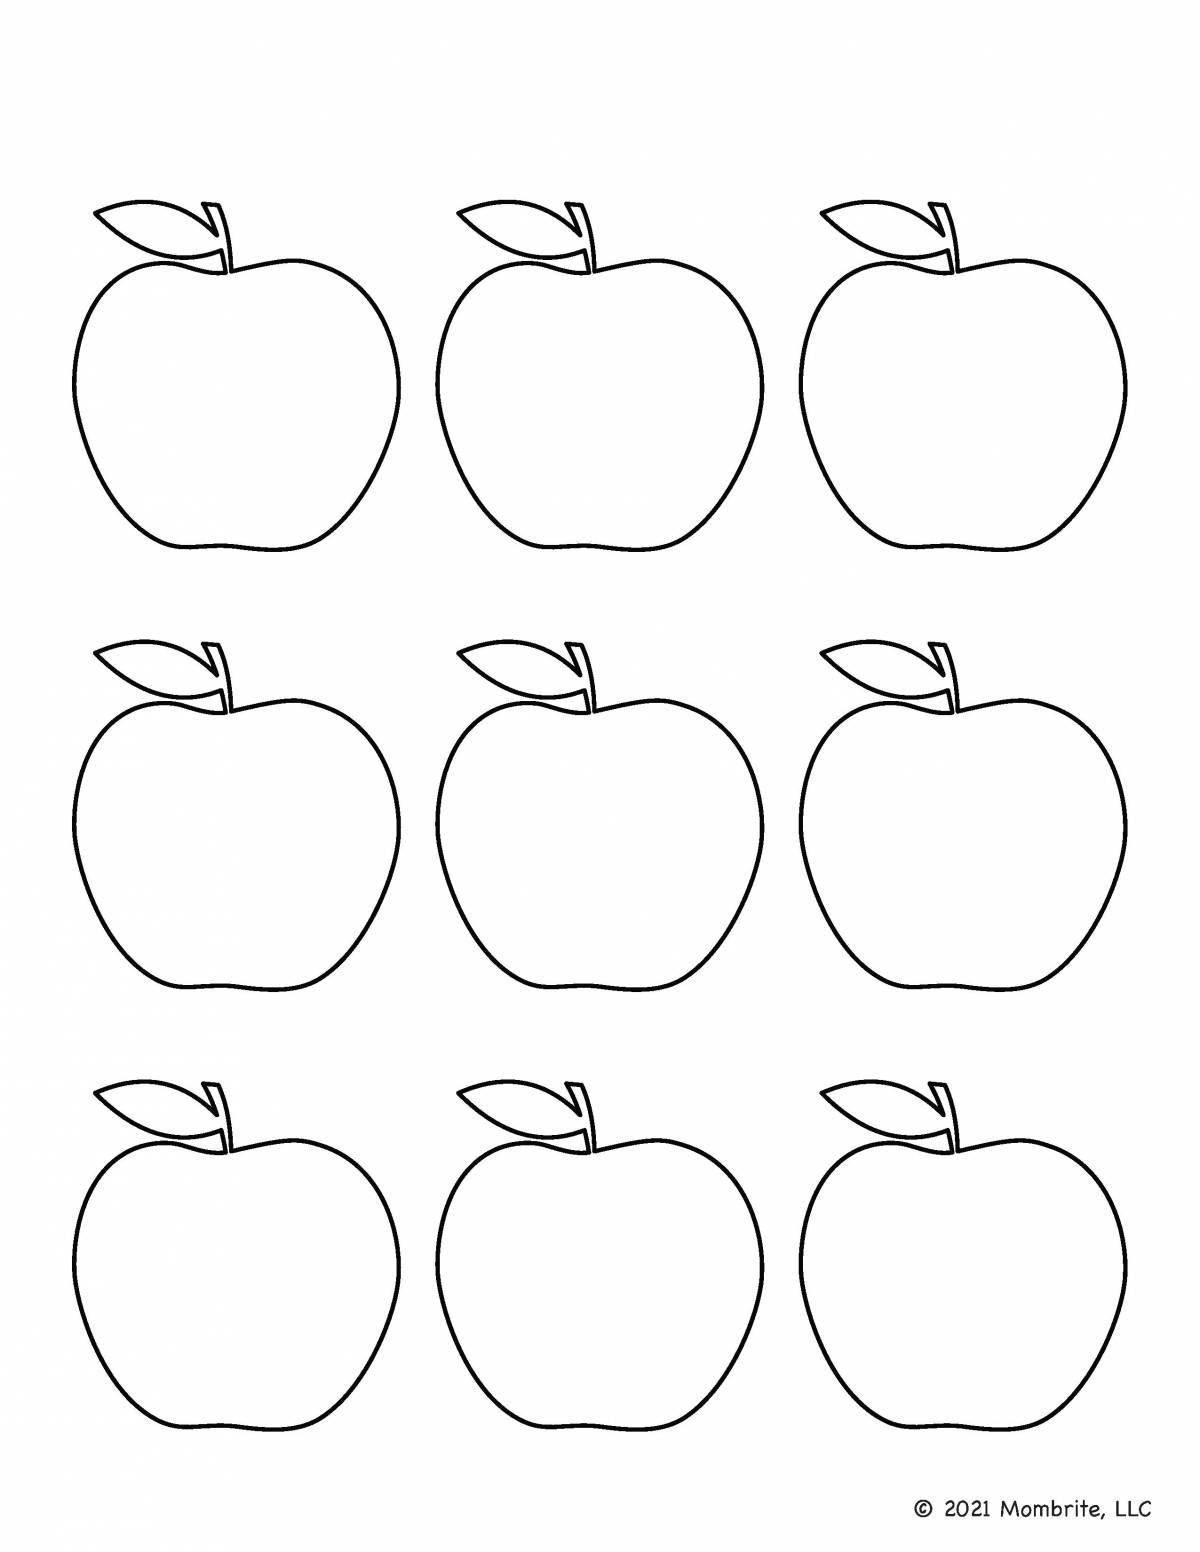 Inspirational apple pattern coloring book